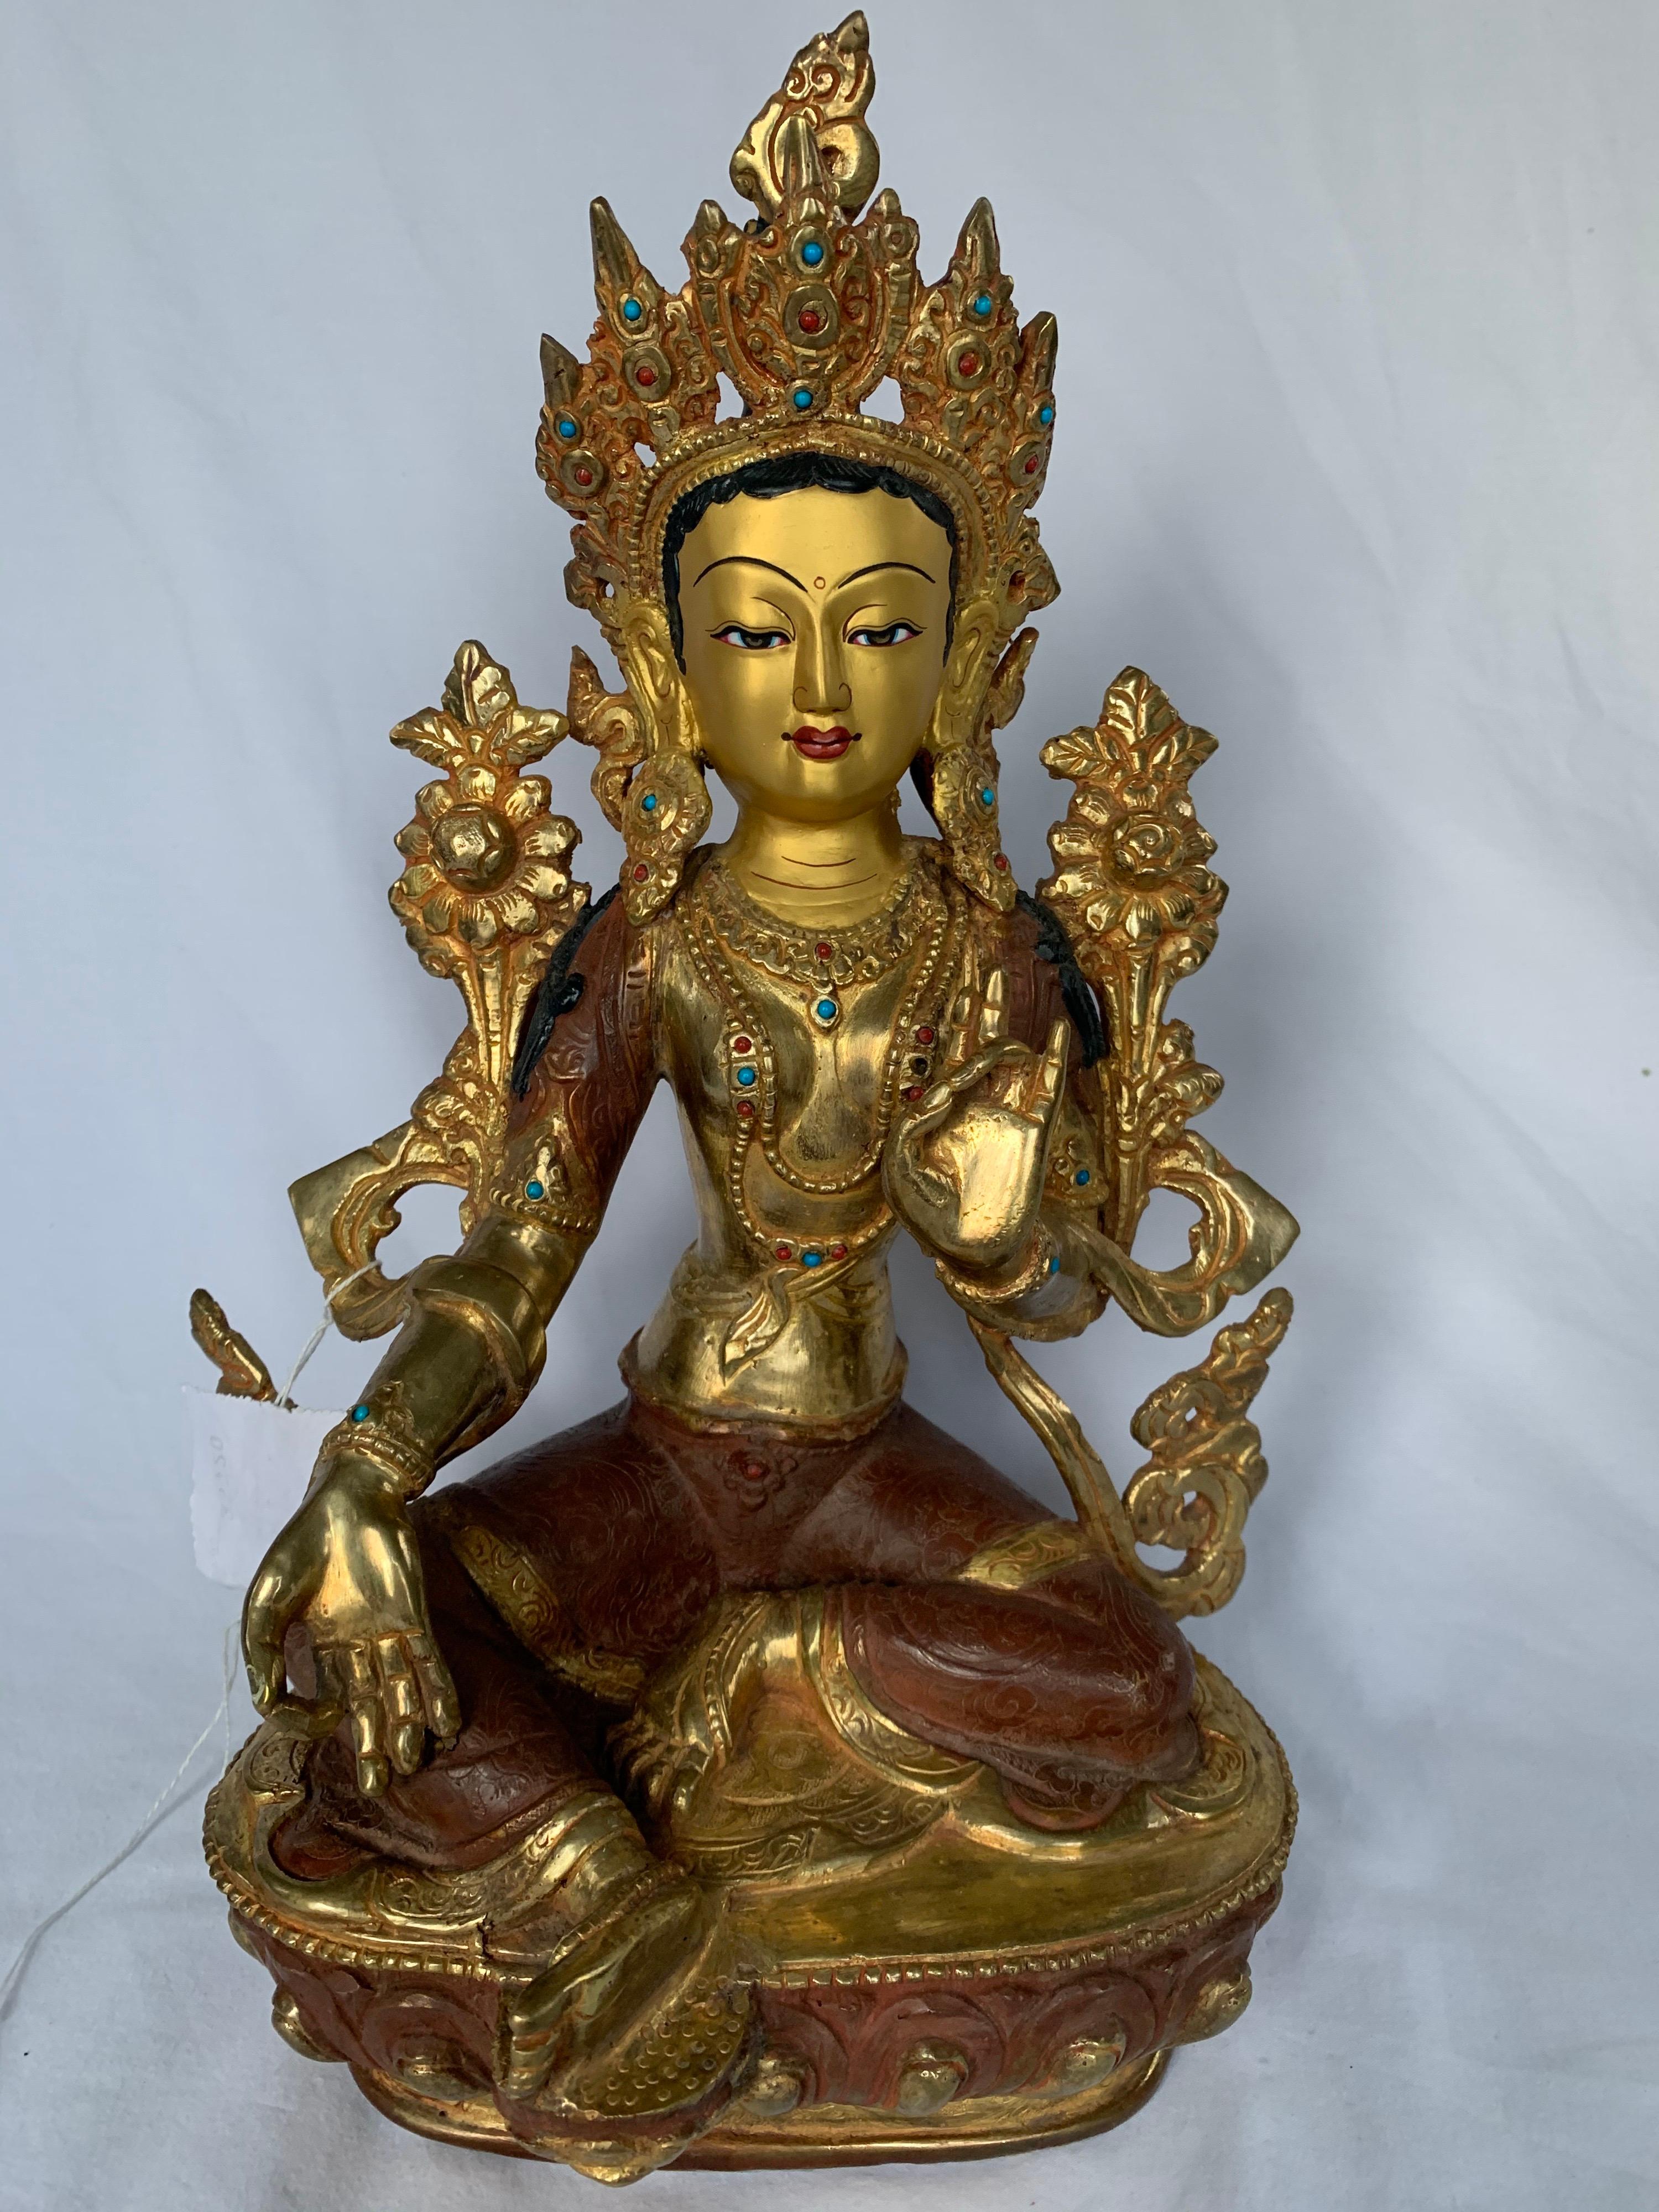 Unknown Figurative Sculpture - Green Tara Statue 12.5 Inch with 24K Gold Handcrafted by Lost Wax Process